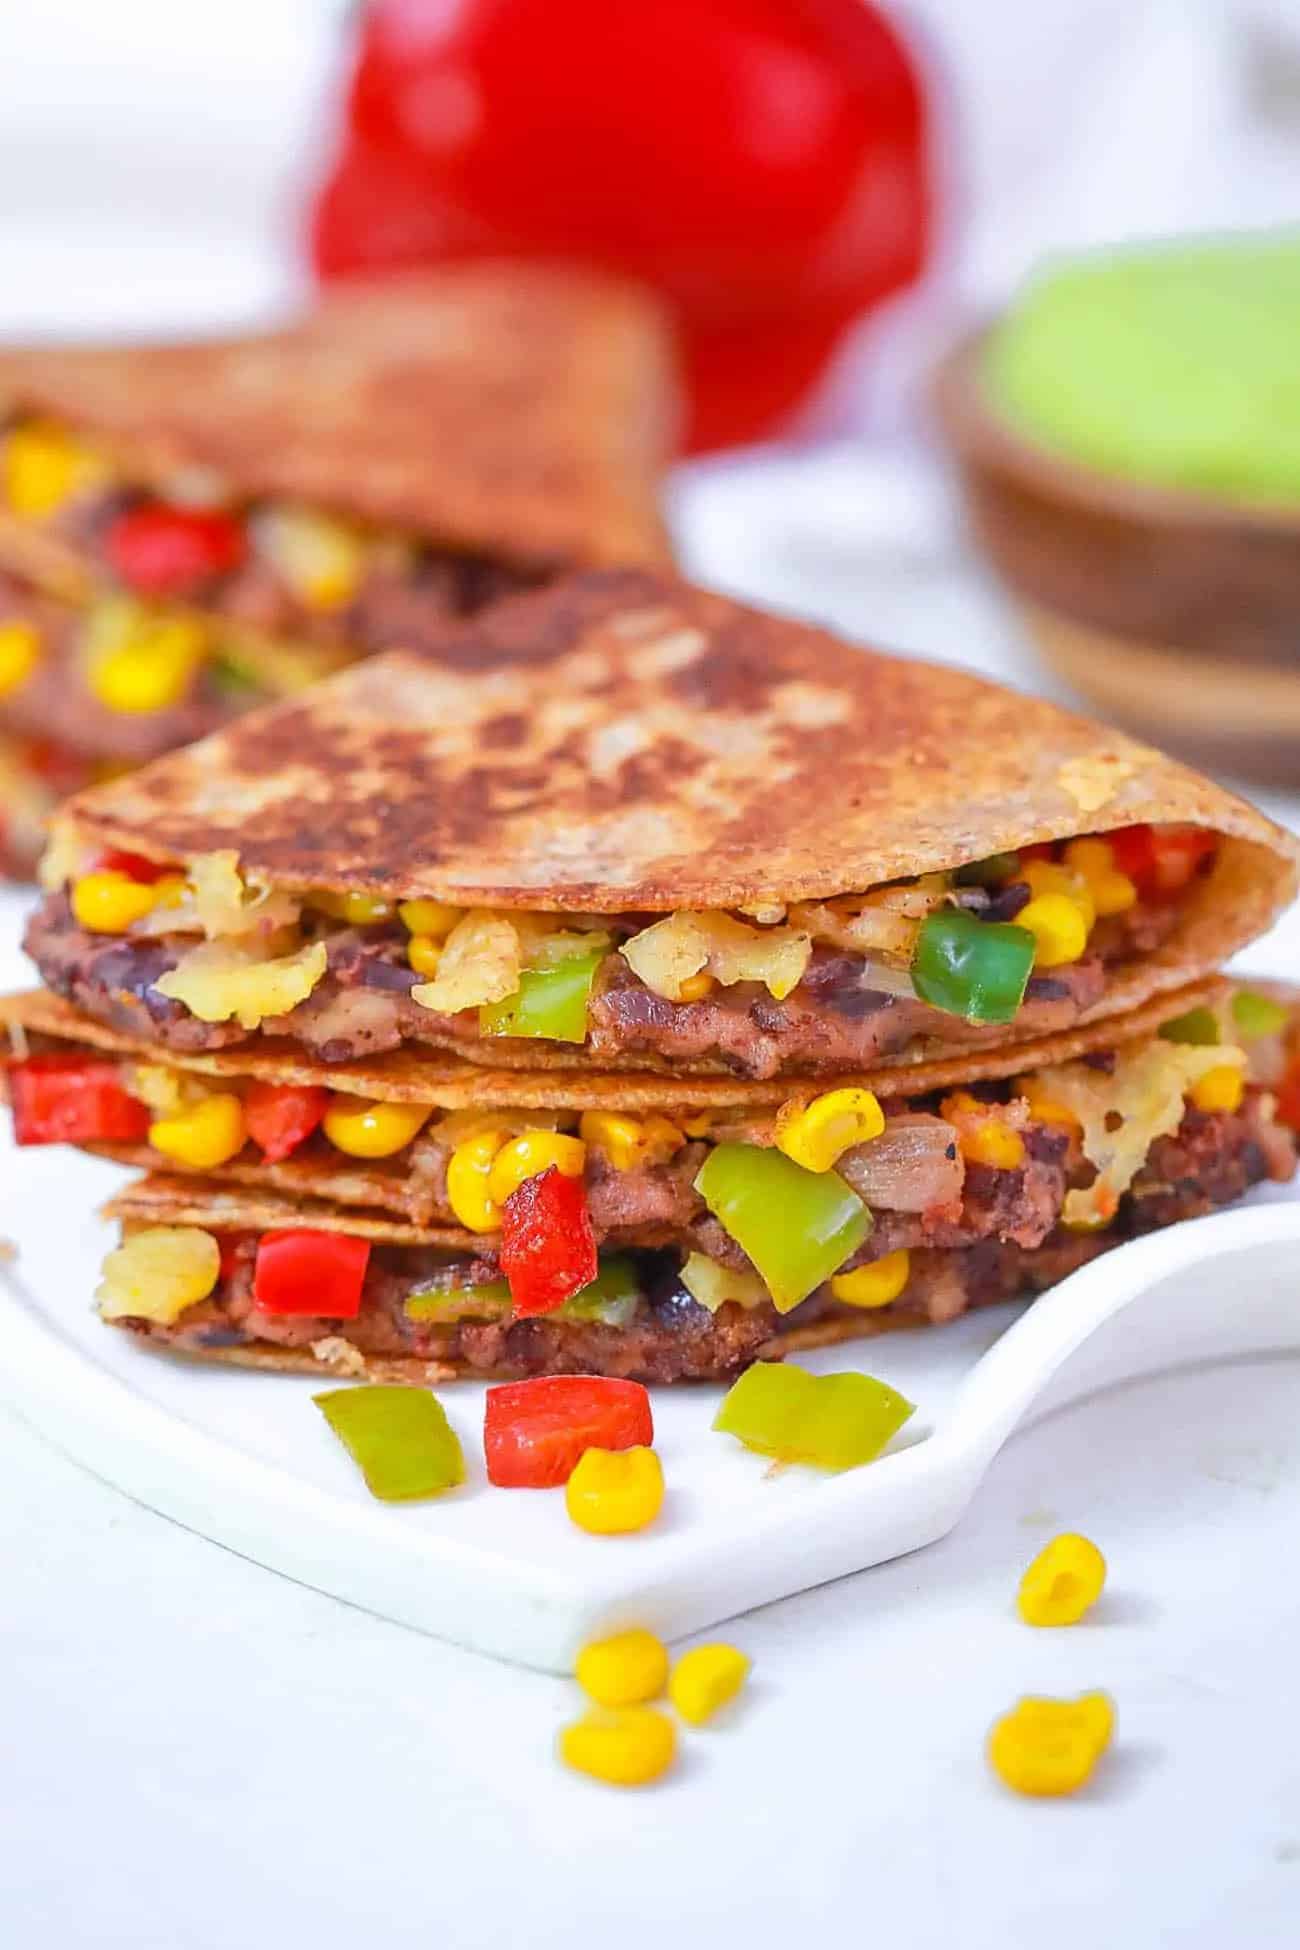 Front view of quesadillas